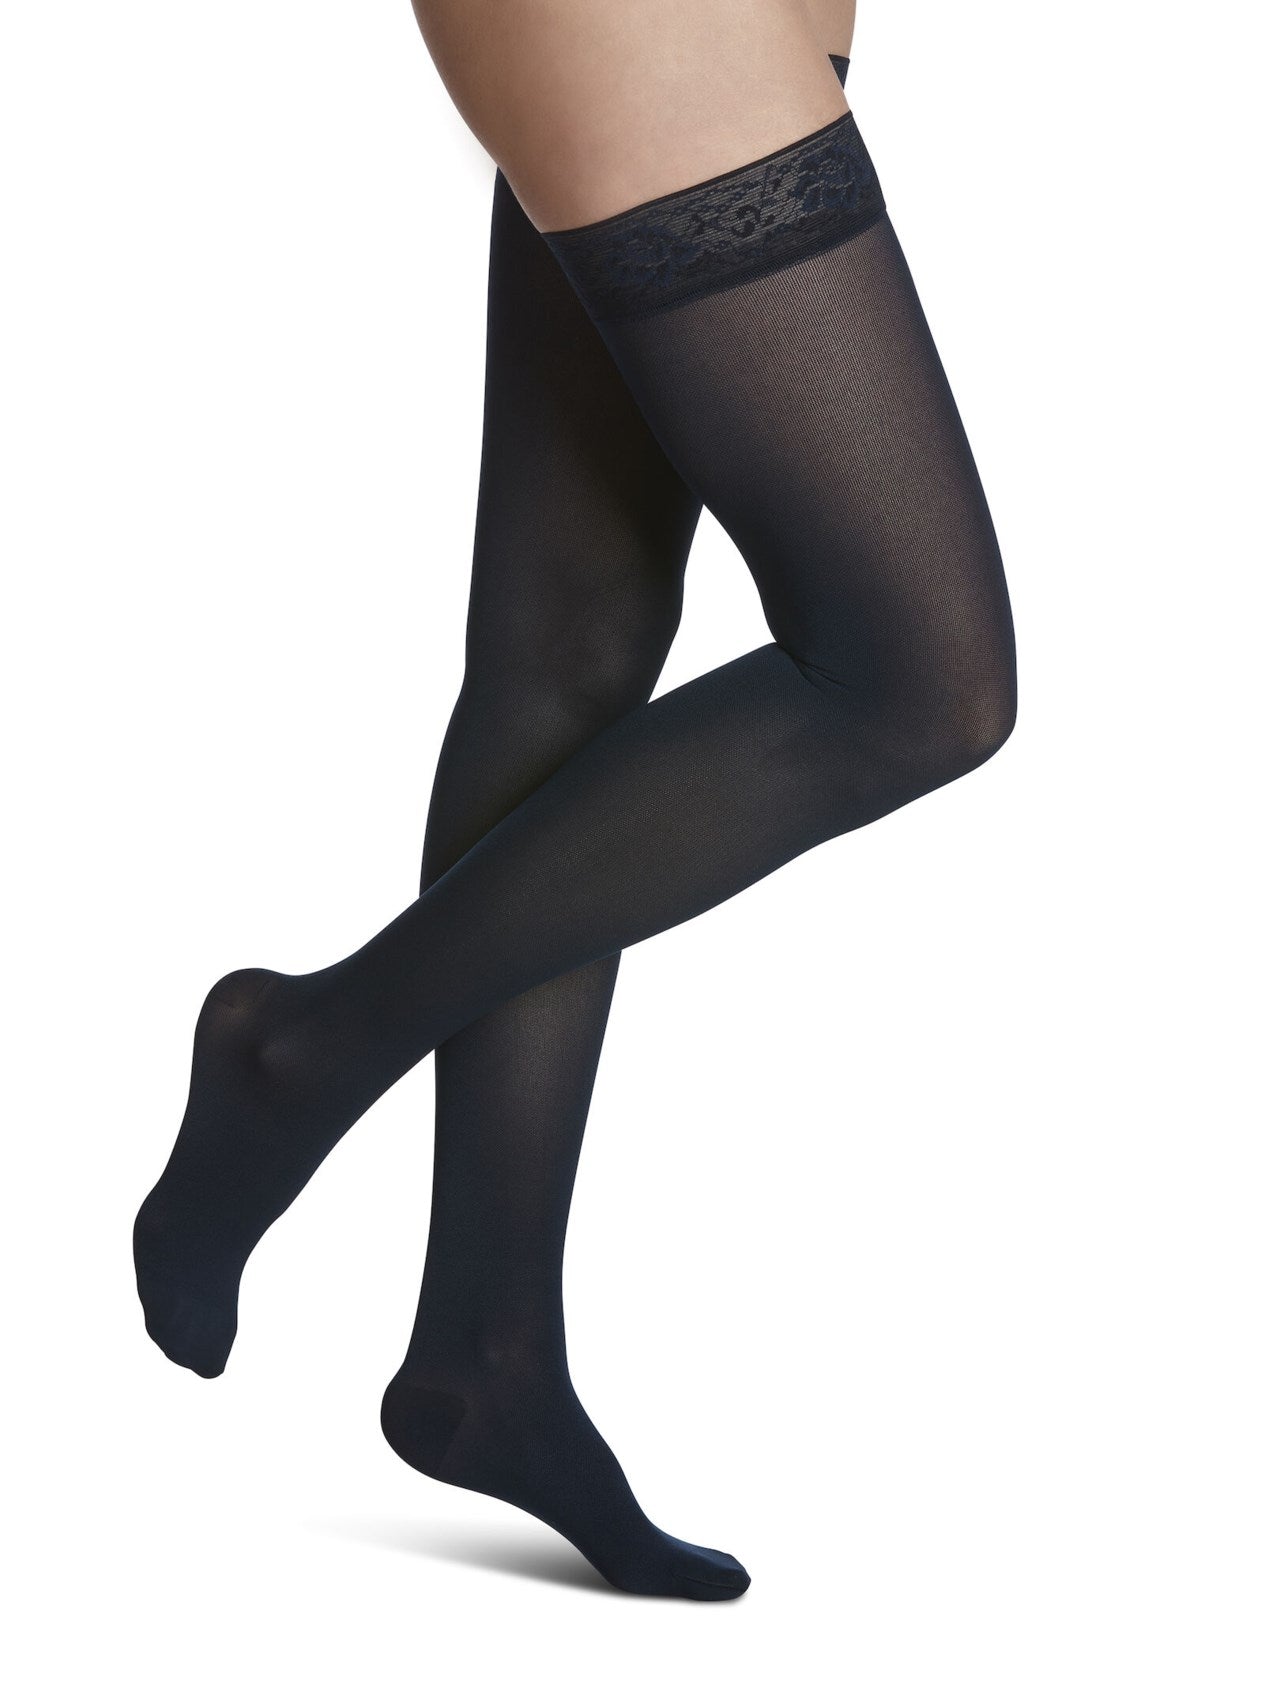 Sigvaris Soft Opaque Open Toe Pantyhose • 840 series – Sigvaris-YoU  Compression Wear®